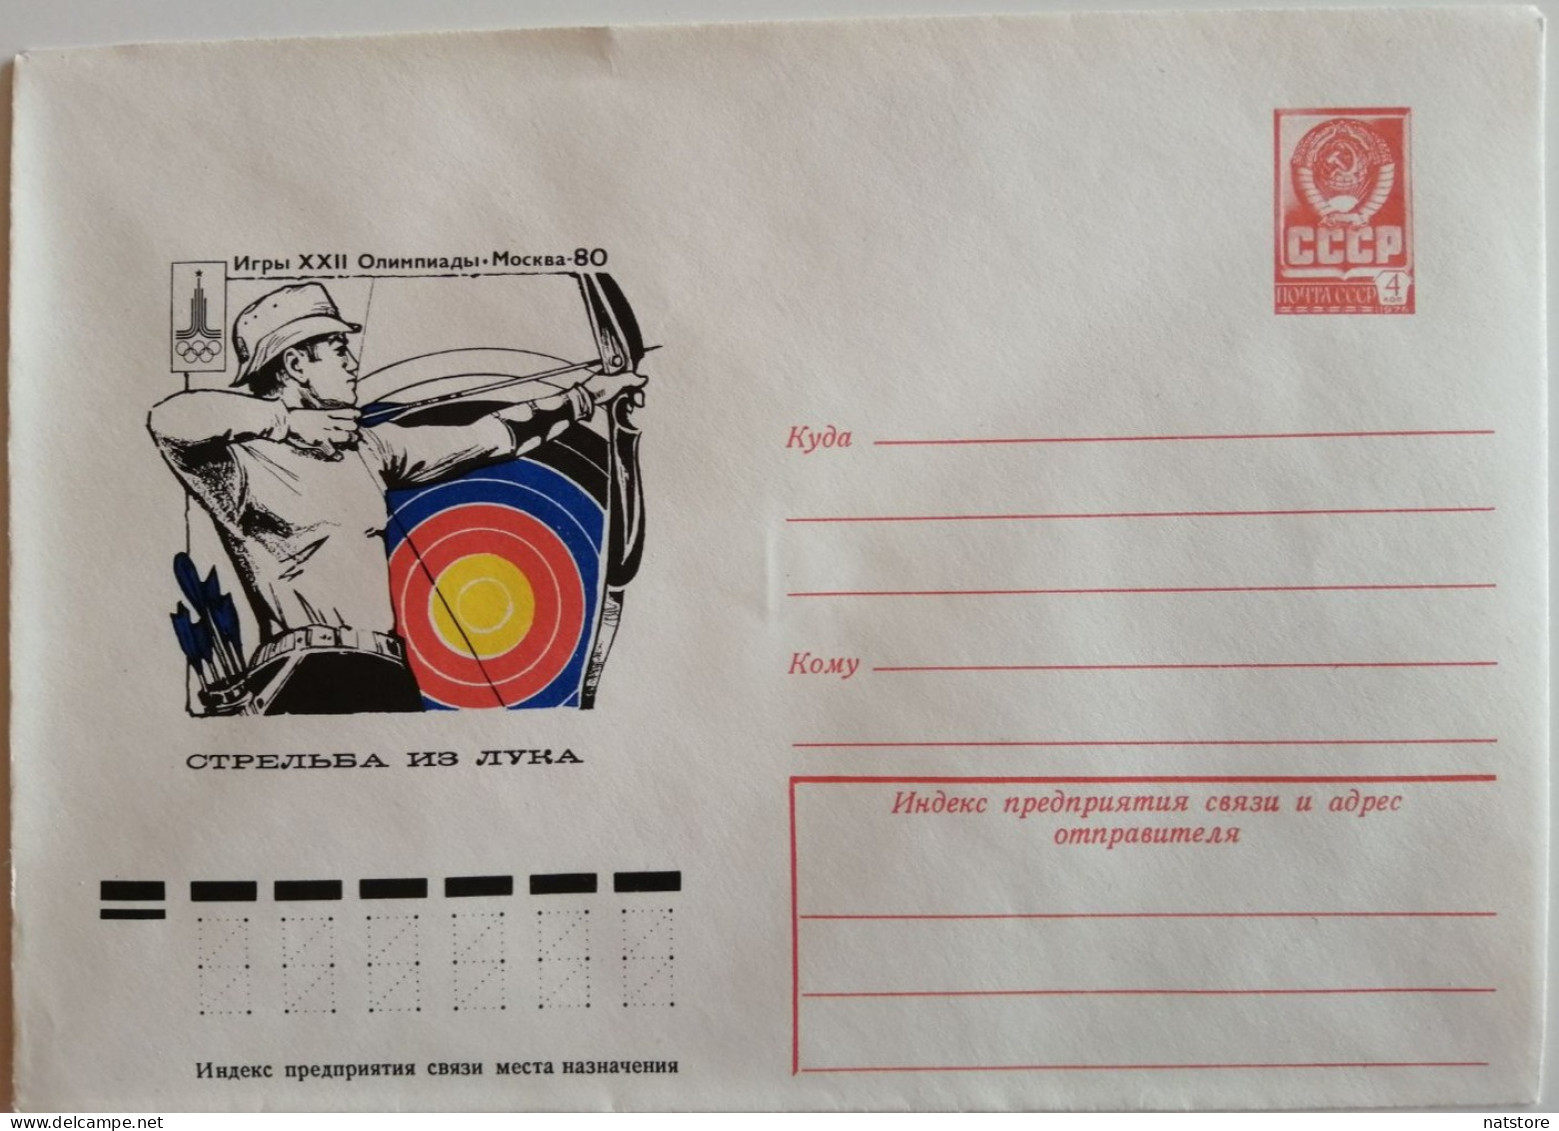 1977..USSR...VINTAGE  COVER WITH STAMP.. ..OLYMPIC GAMES XXII..MOSCOW-80..ARCHERY - Summer 1980: Moscow